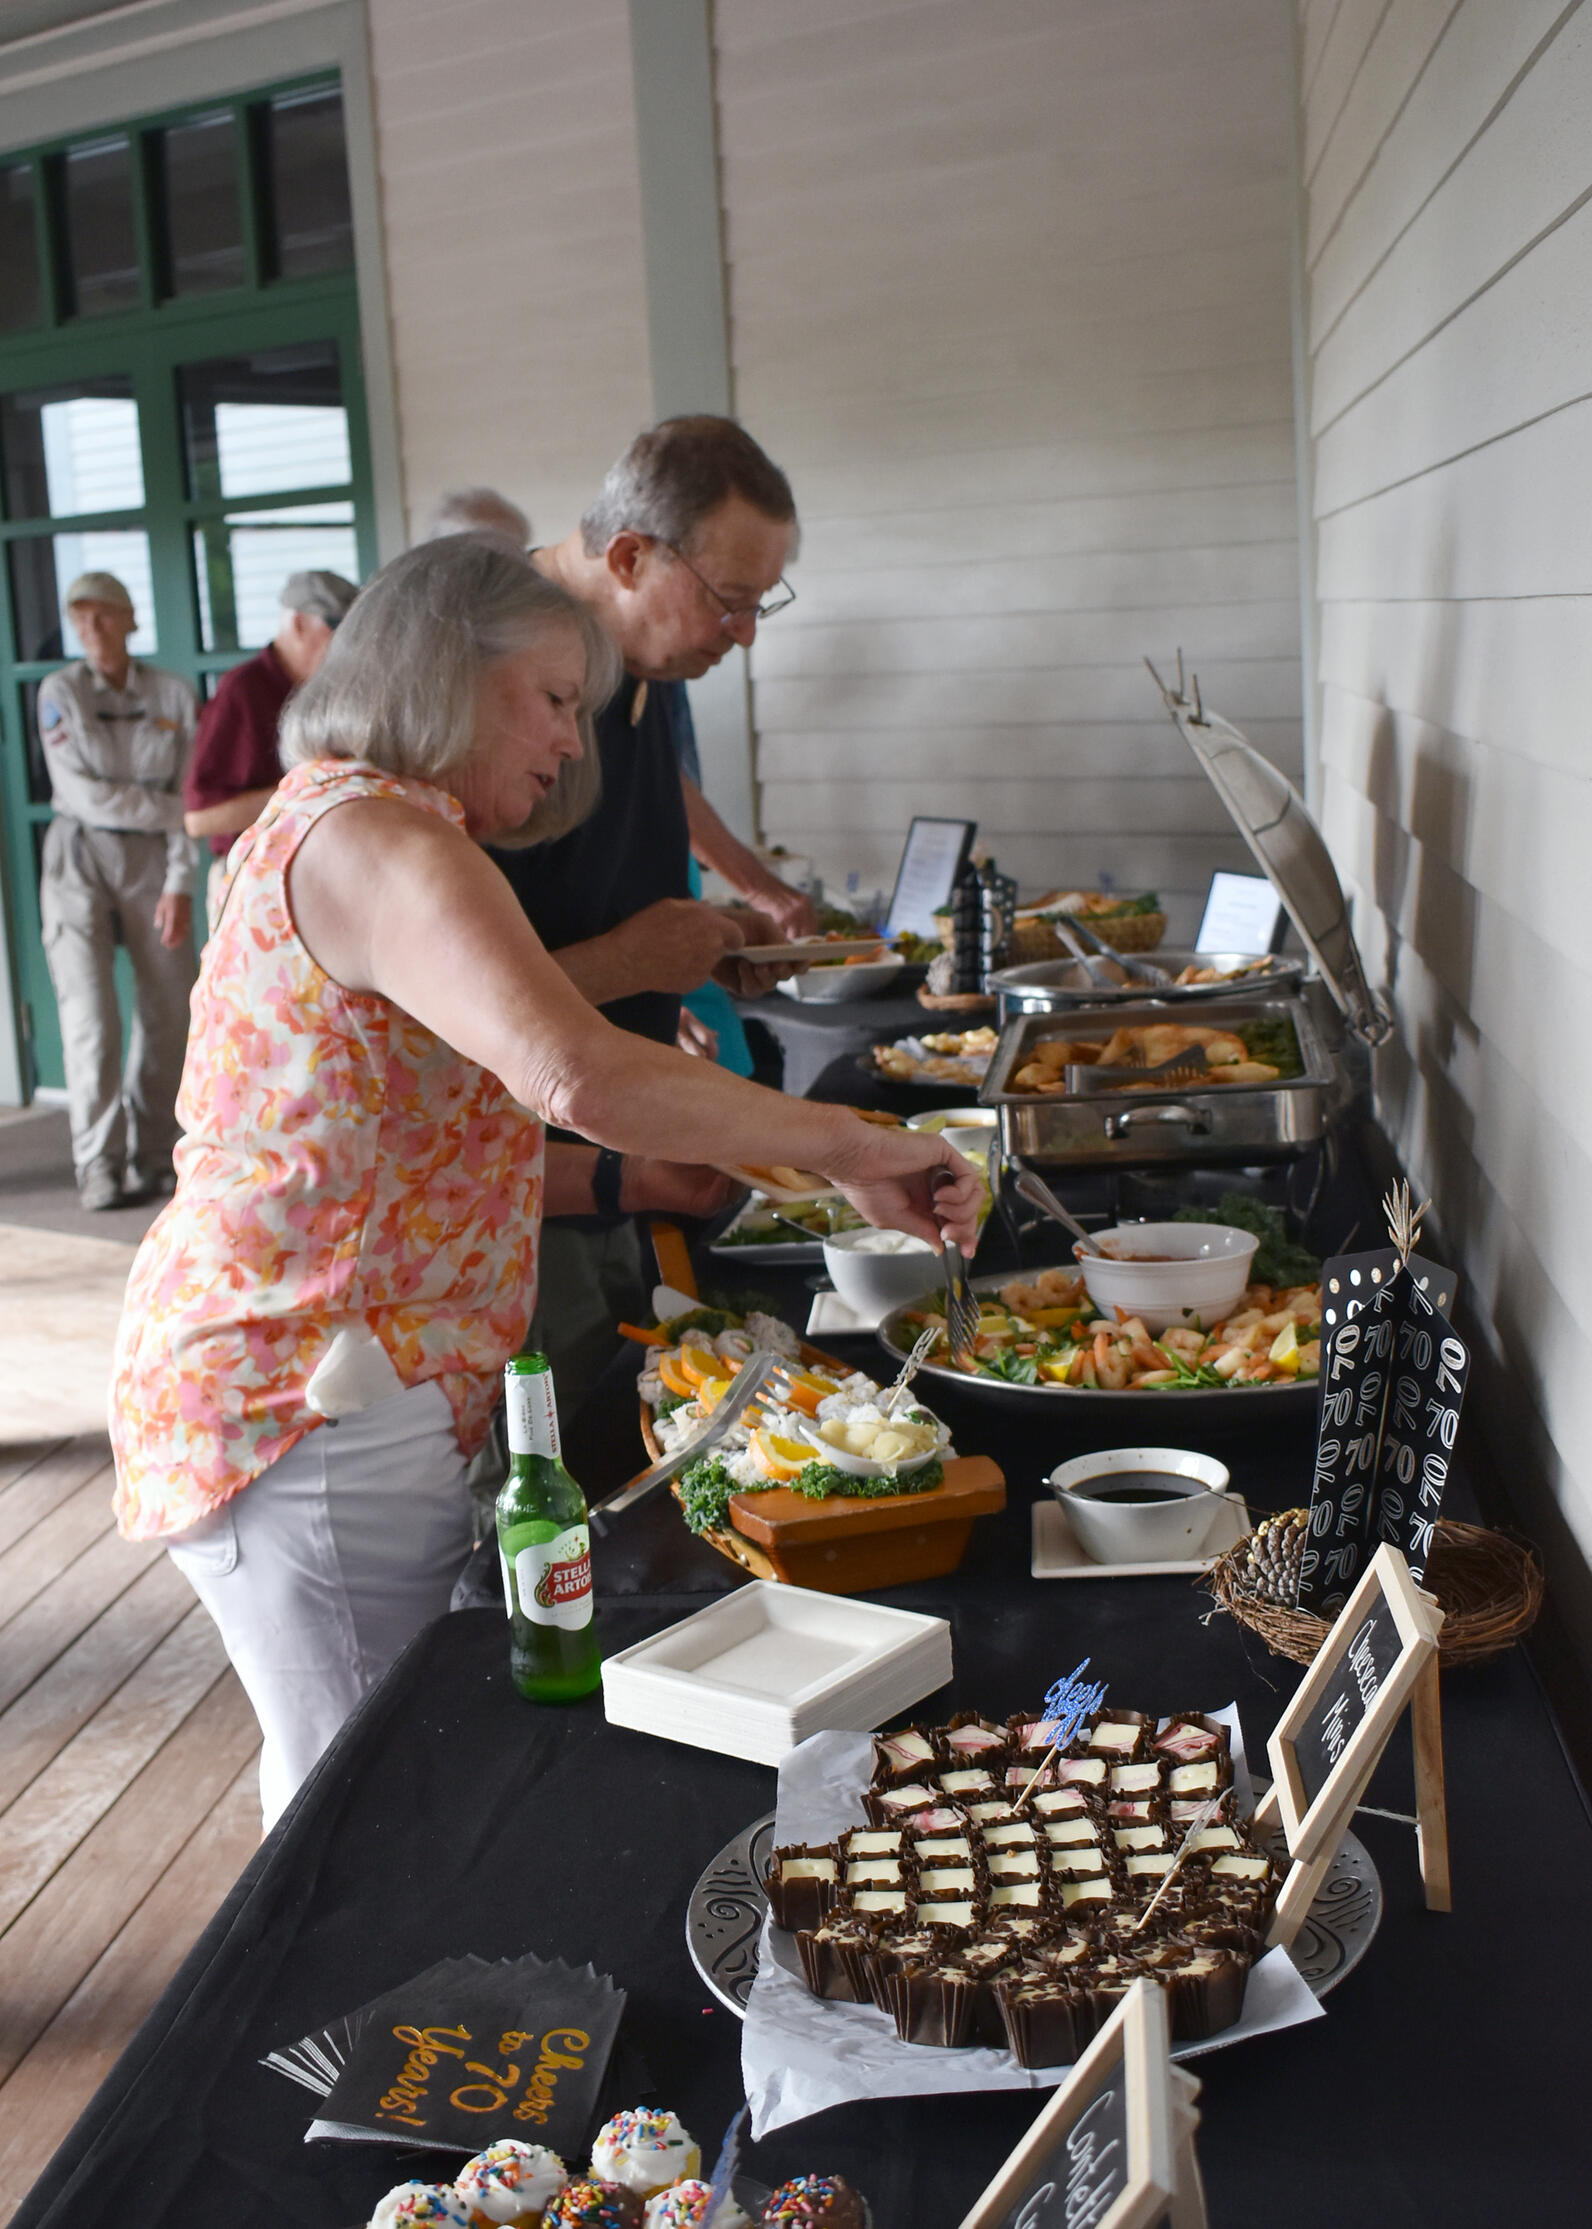 Photo of people serving themselves at a buffet table.